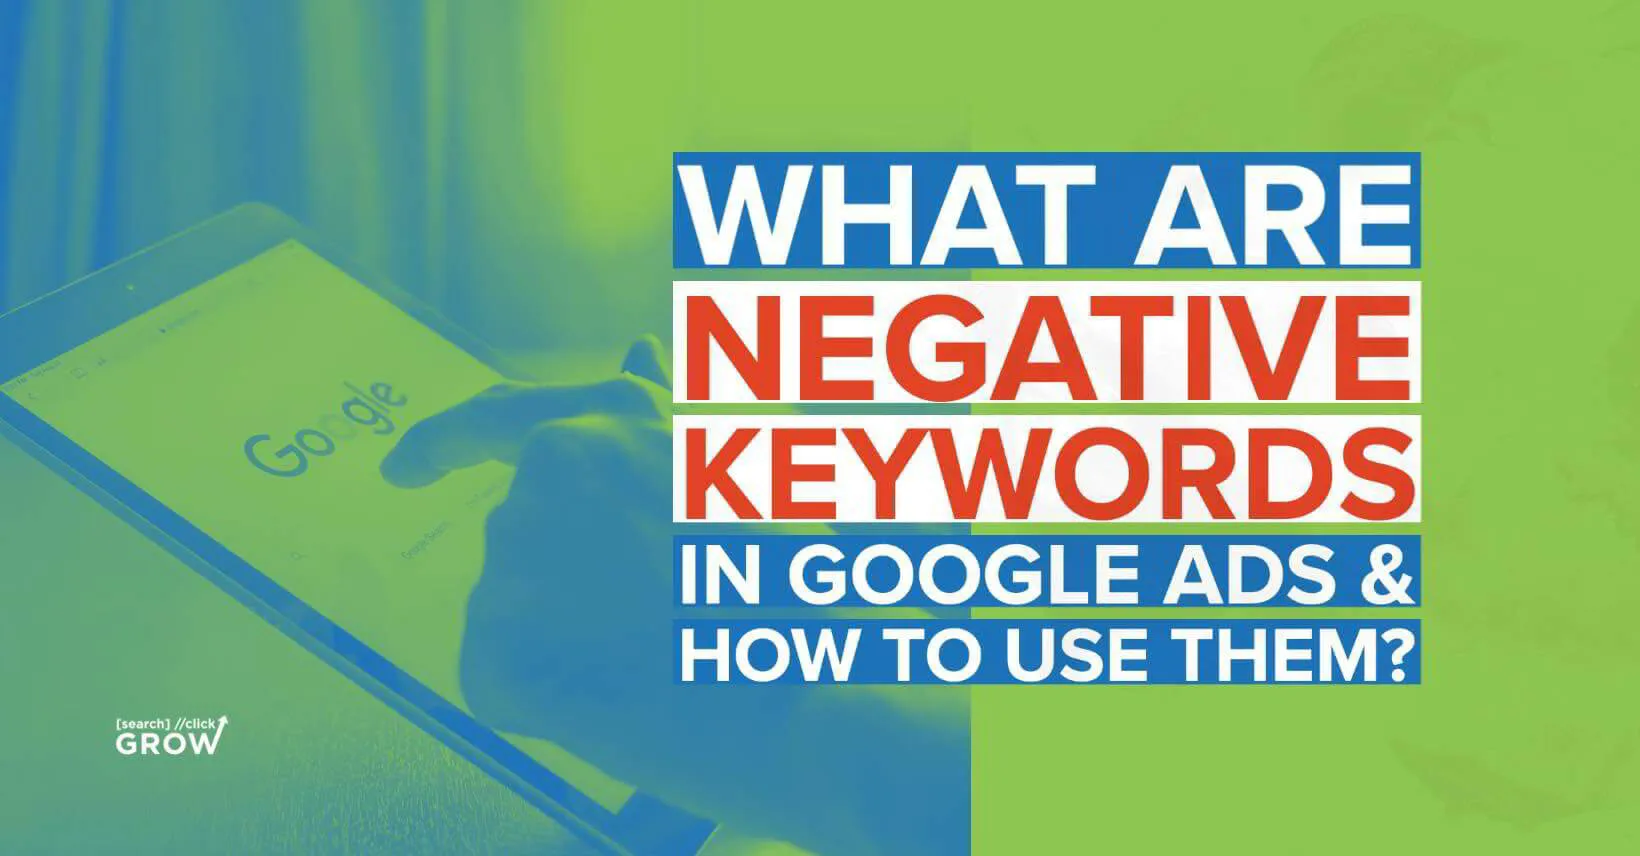 What Are Negative Keywords In Google Ads and How to Use Them?